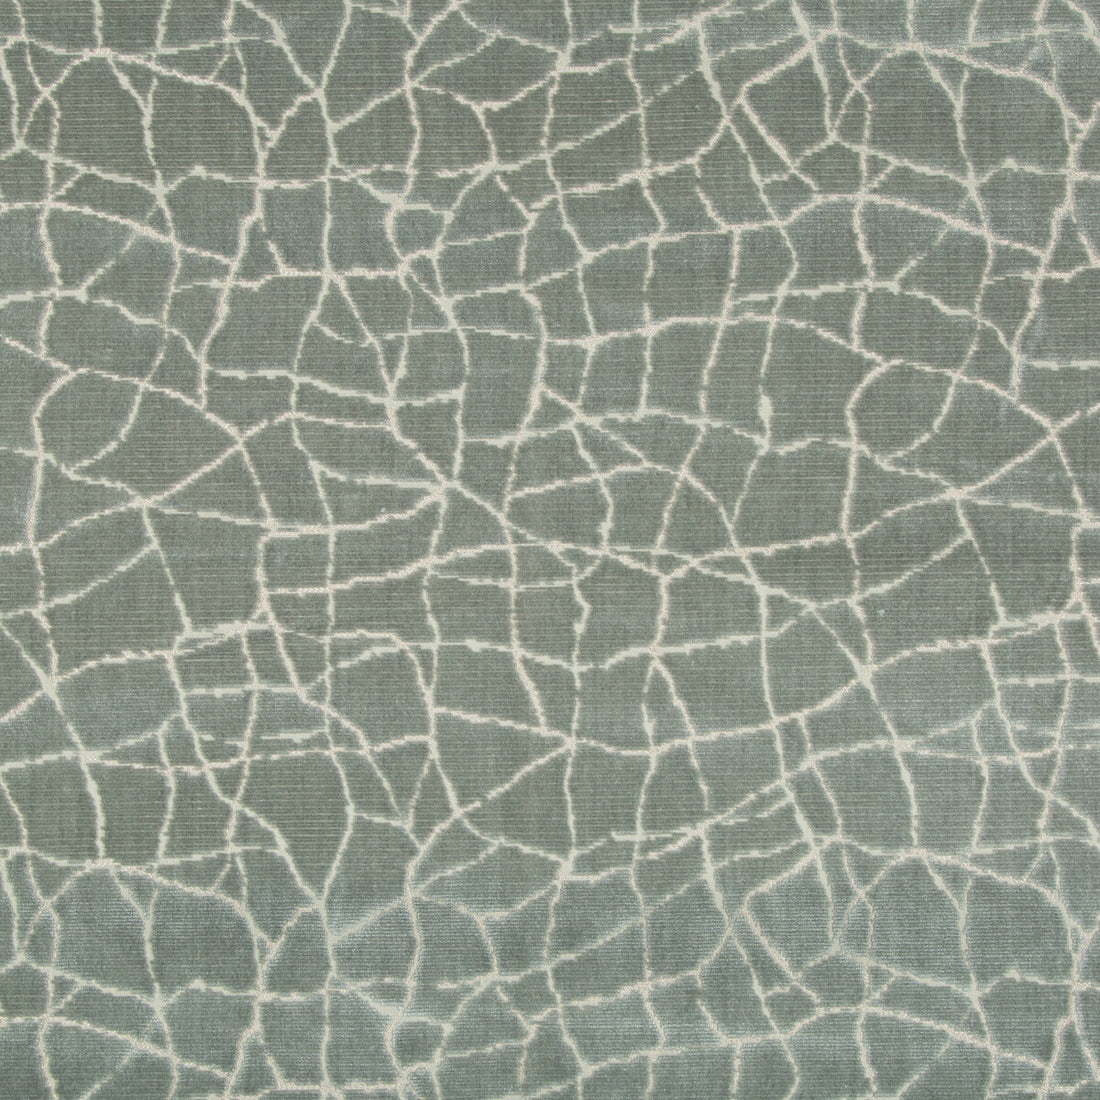 Formation fabric in glacier color - pattern 34780.23.0 - by Kravet Couture in the Artisan Velvets collection